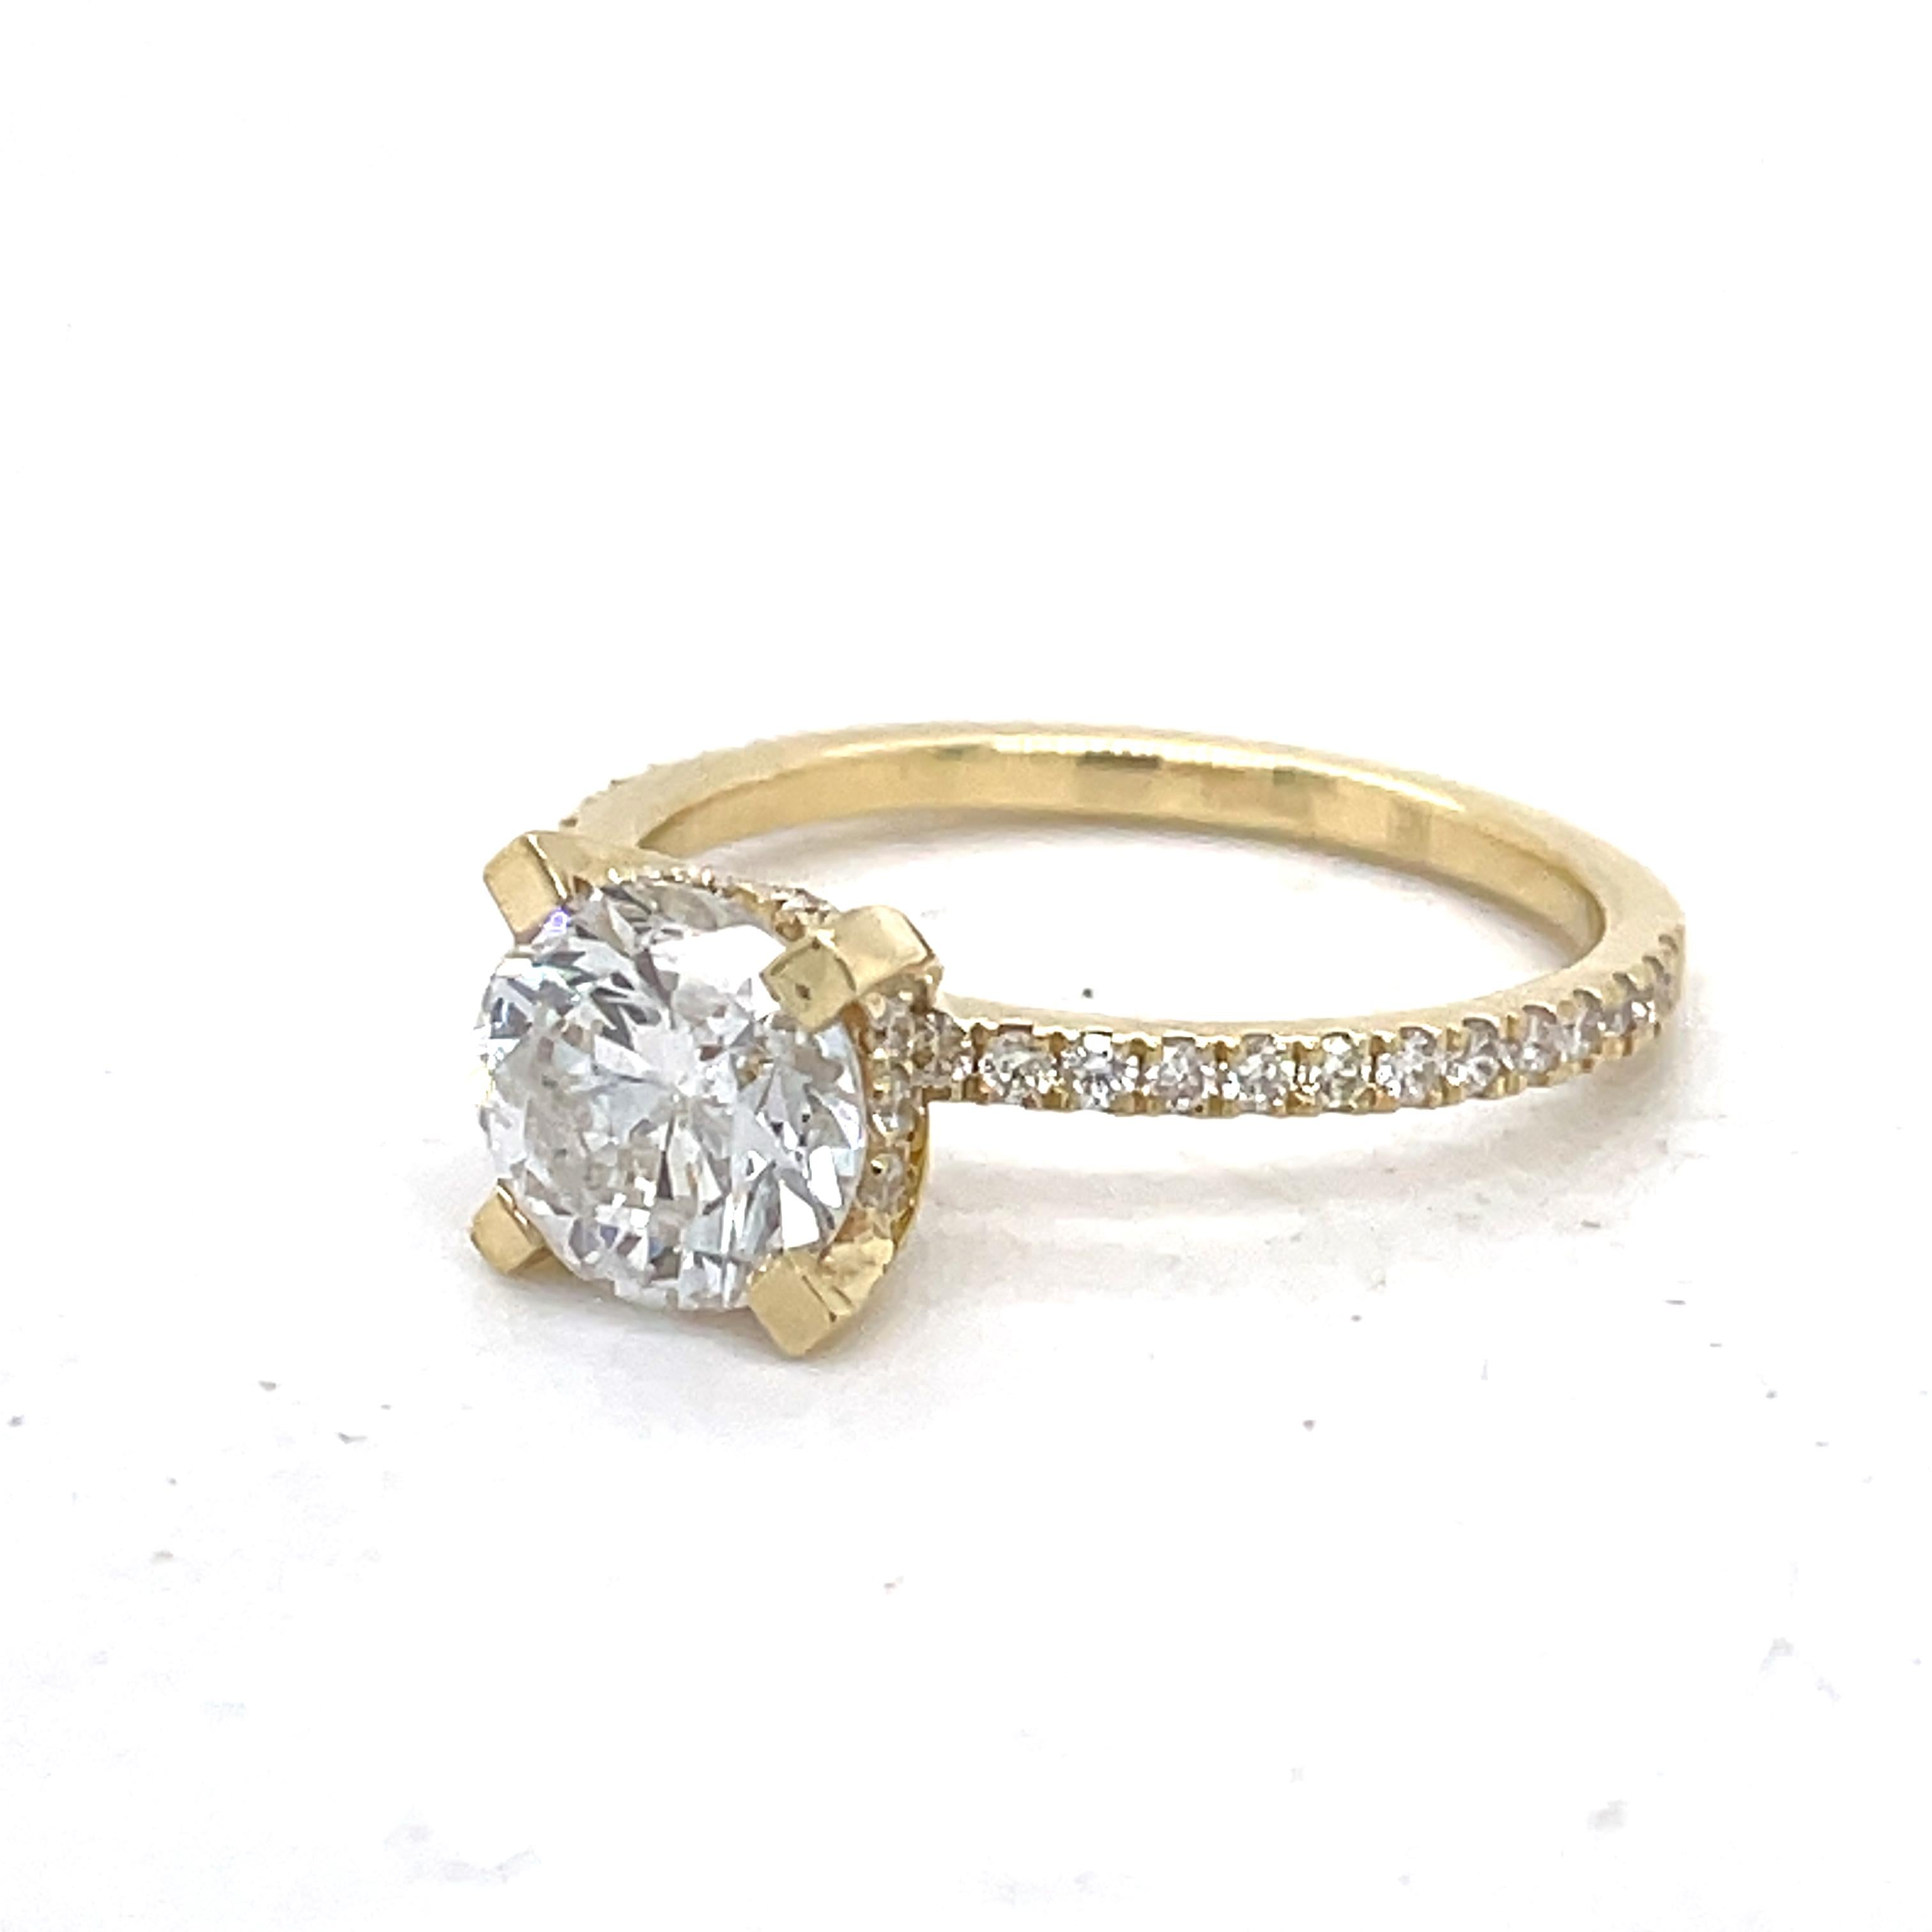 jewelry Material: Yellow Gold 14k (the gold has been tested by a professional)

Total Carat Weight: 1.9 ct (Approx.)

Total Metal Weight: 2.48g

Size: 6.5 US \ EU 53 \ Diameter 16.90mm (inner diameter)



Grading Results:

Stone Type: